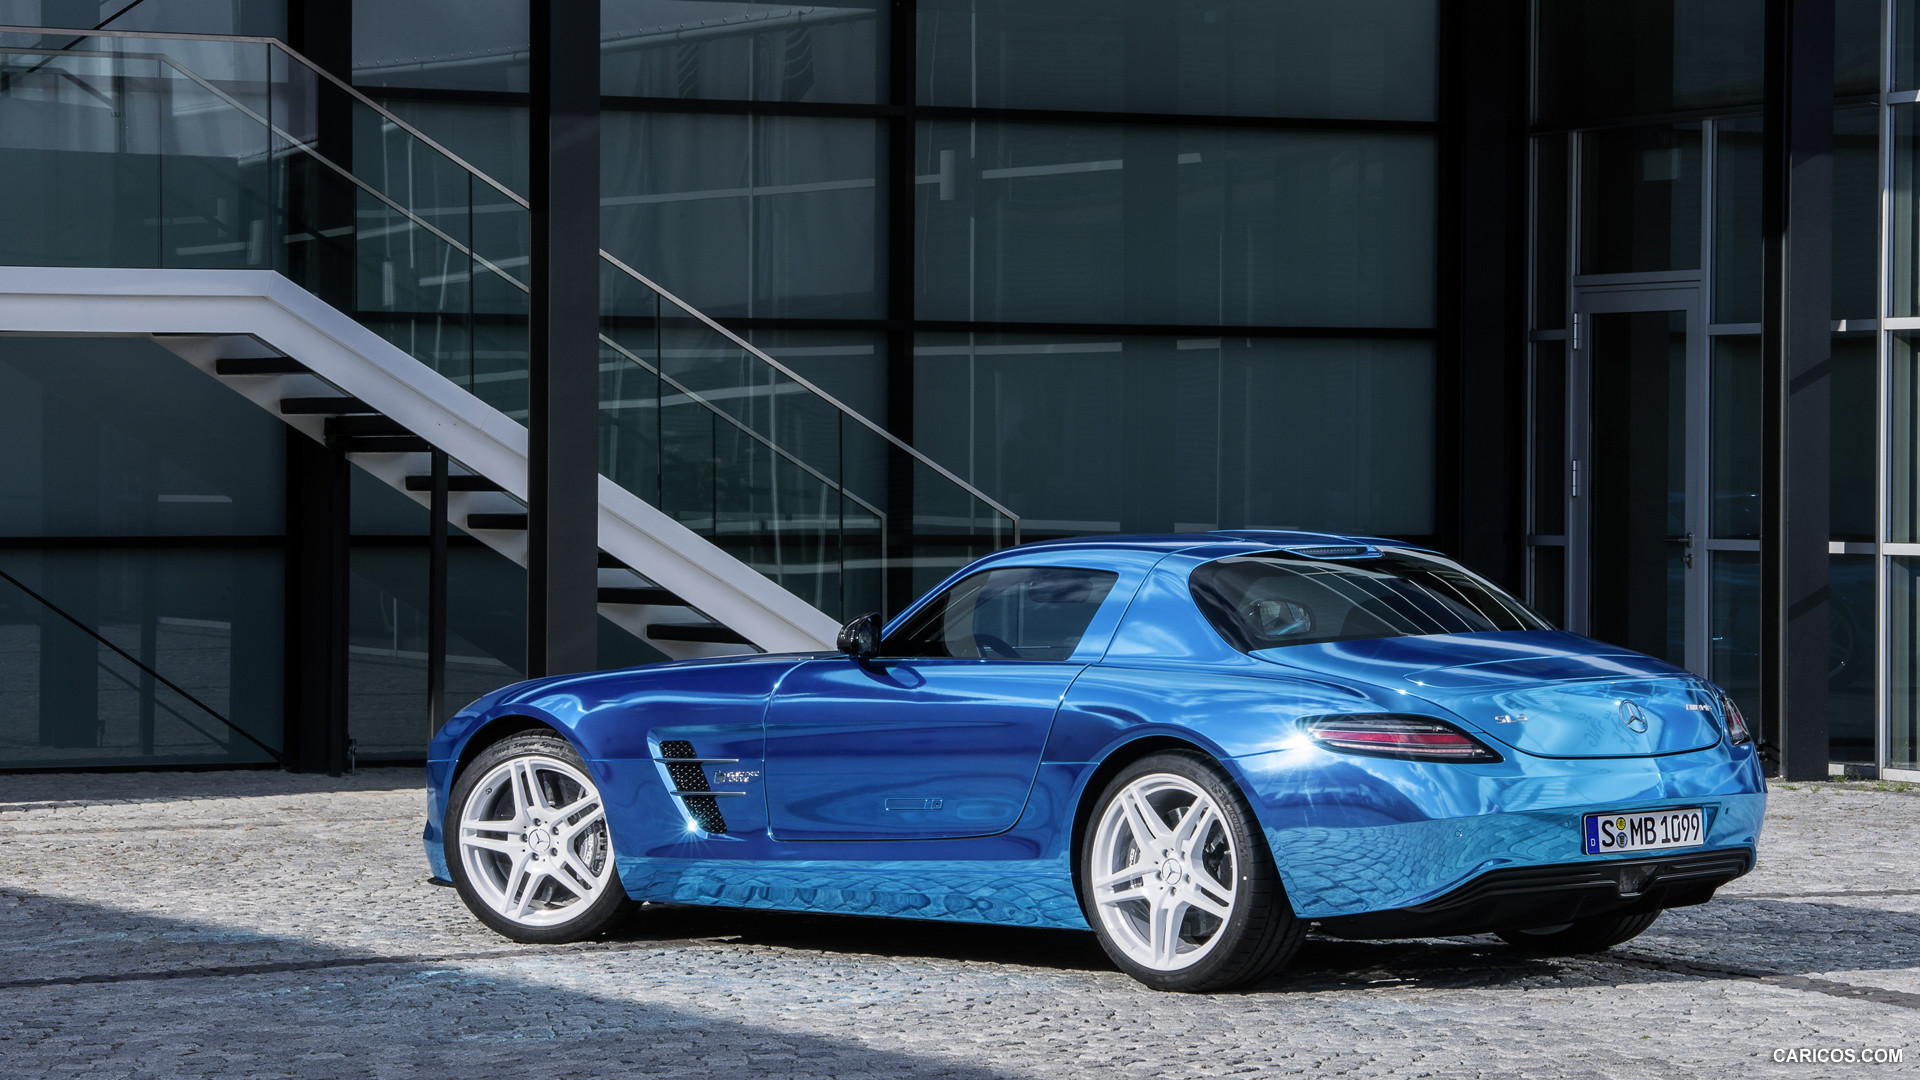 2014 Mercedes-Benz SLS AMG Coupe Electric Drive  - Rear, #22 of 47